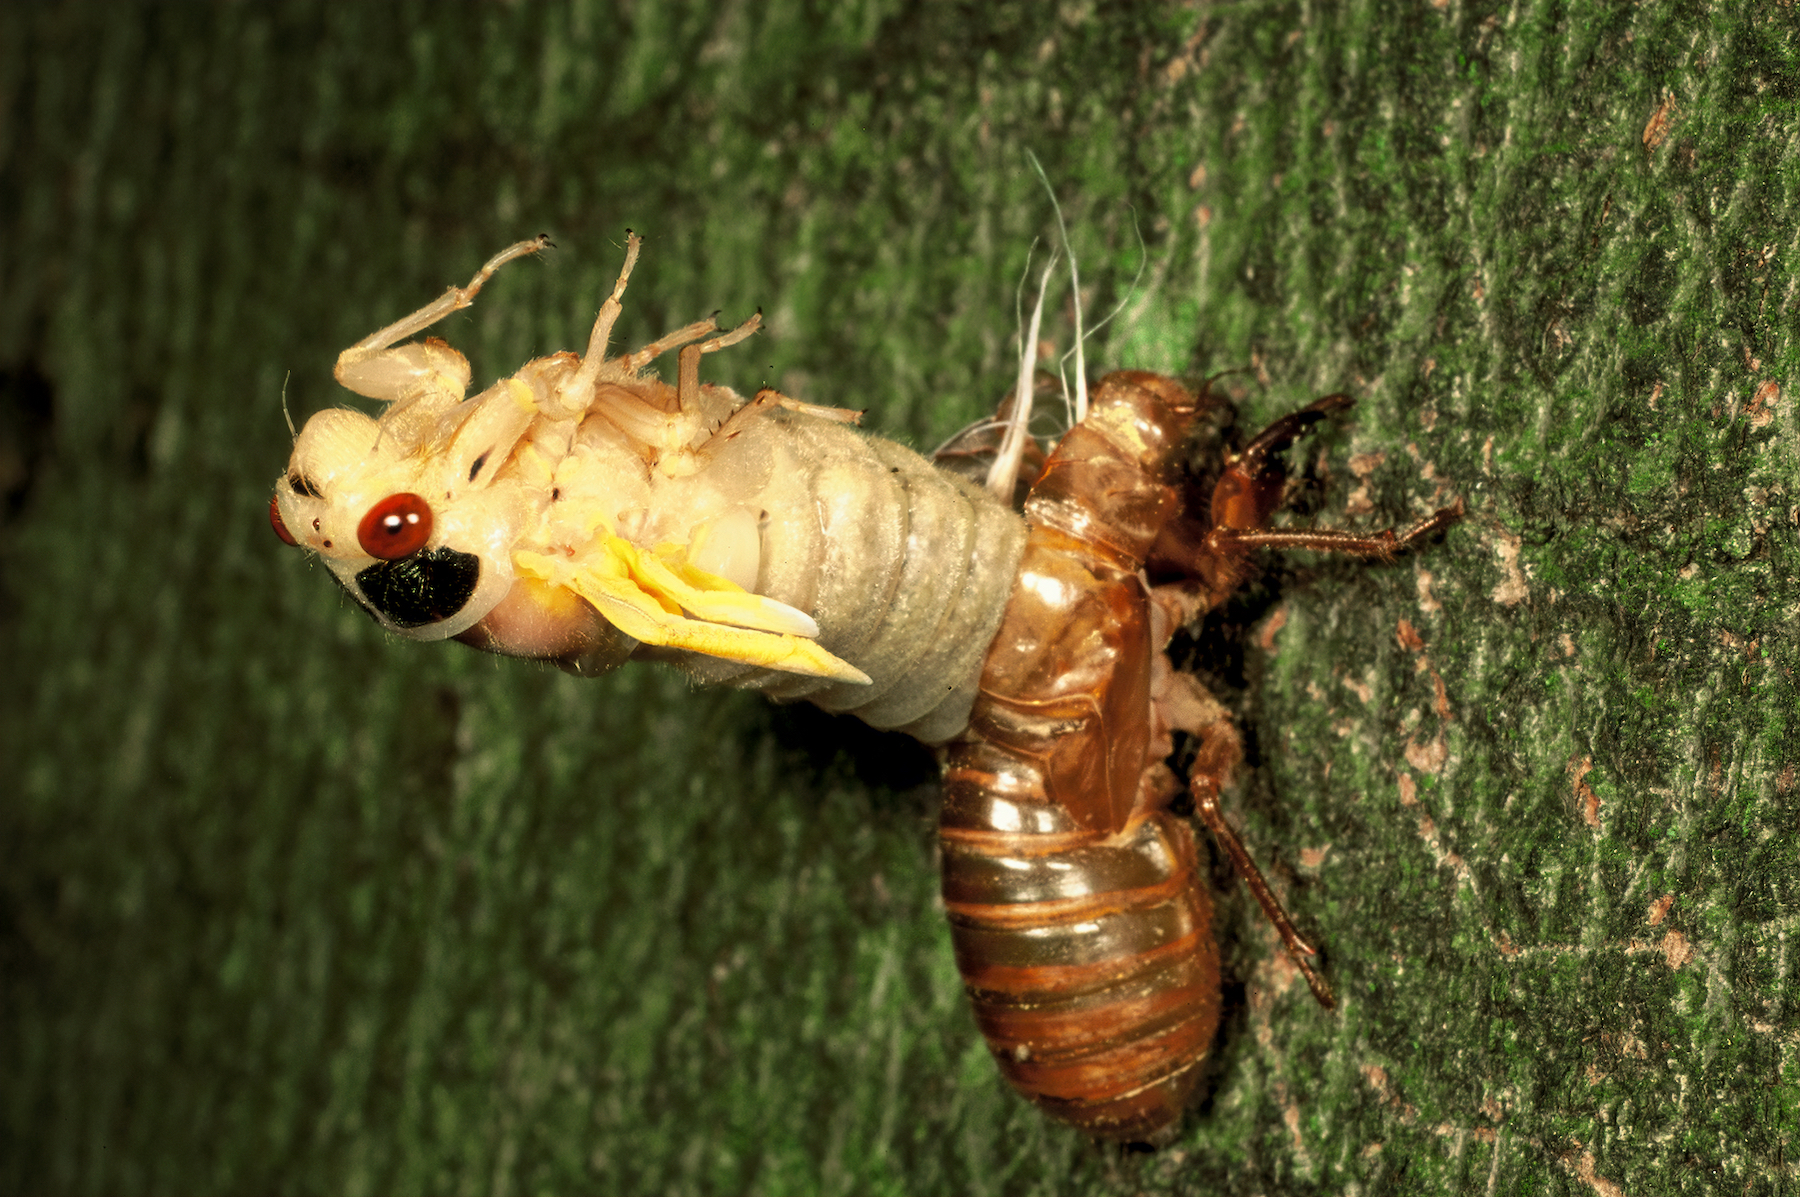 A white/cream colored cicada bug emerging sideways from a caramel-colored exoskeleton on a tree.